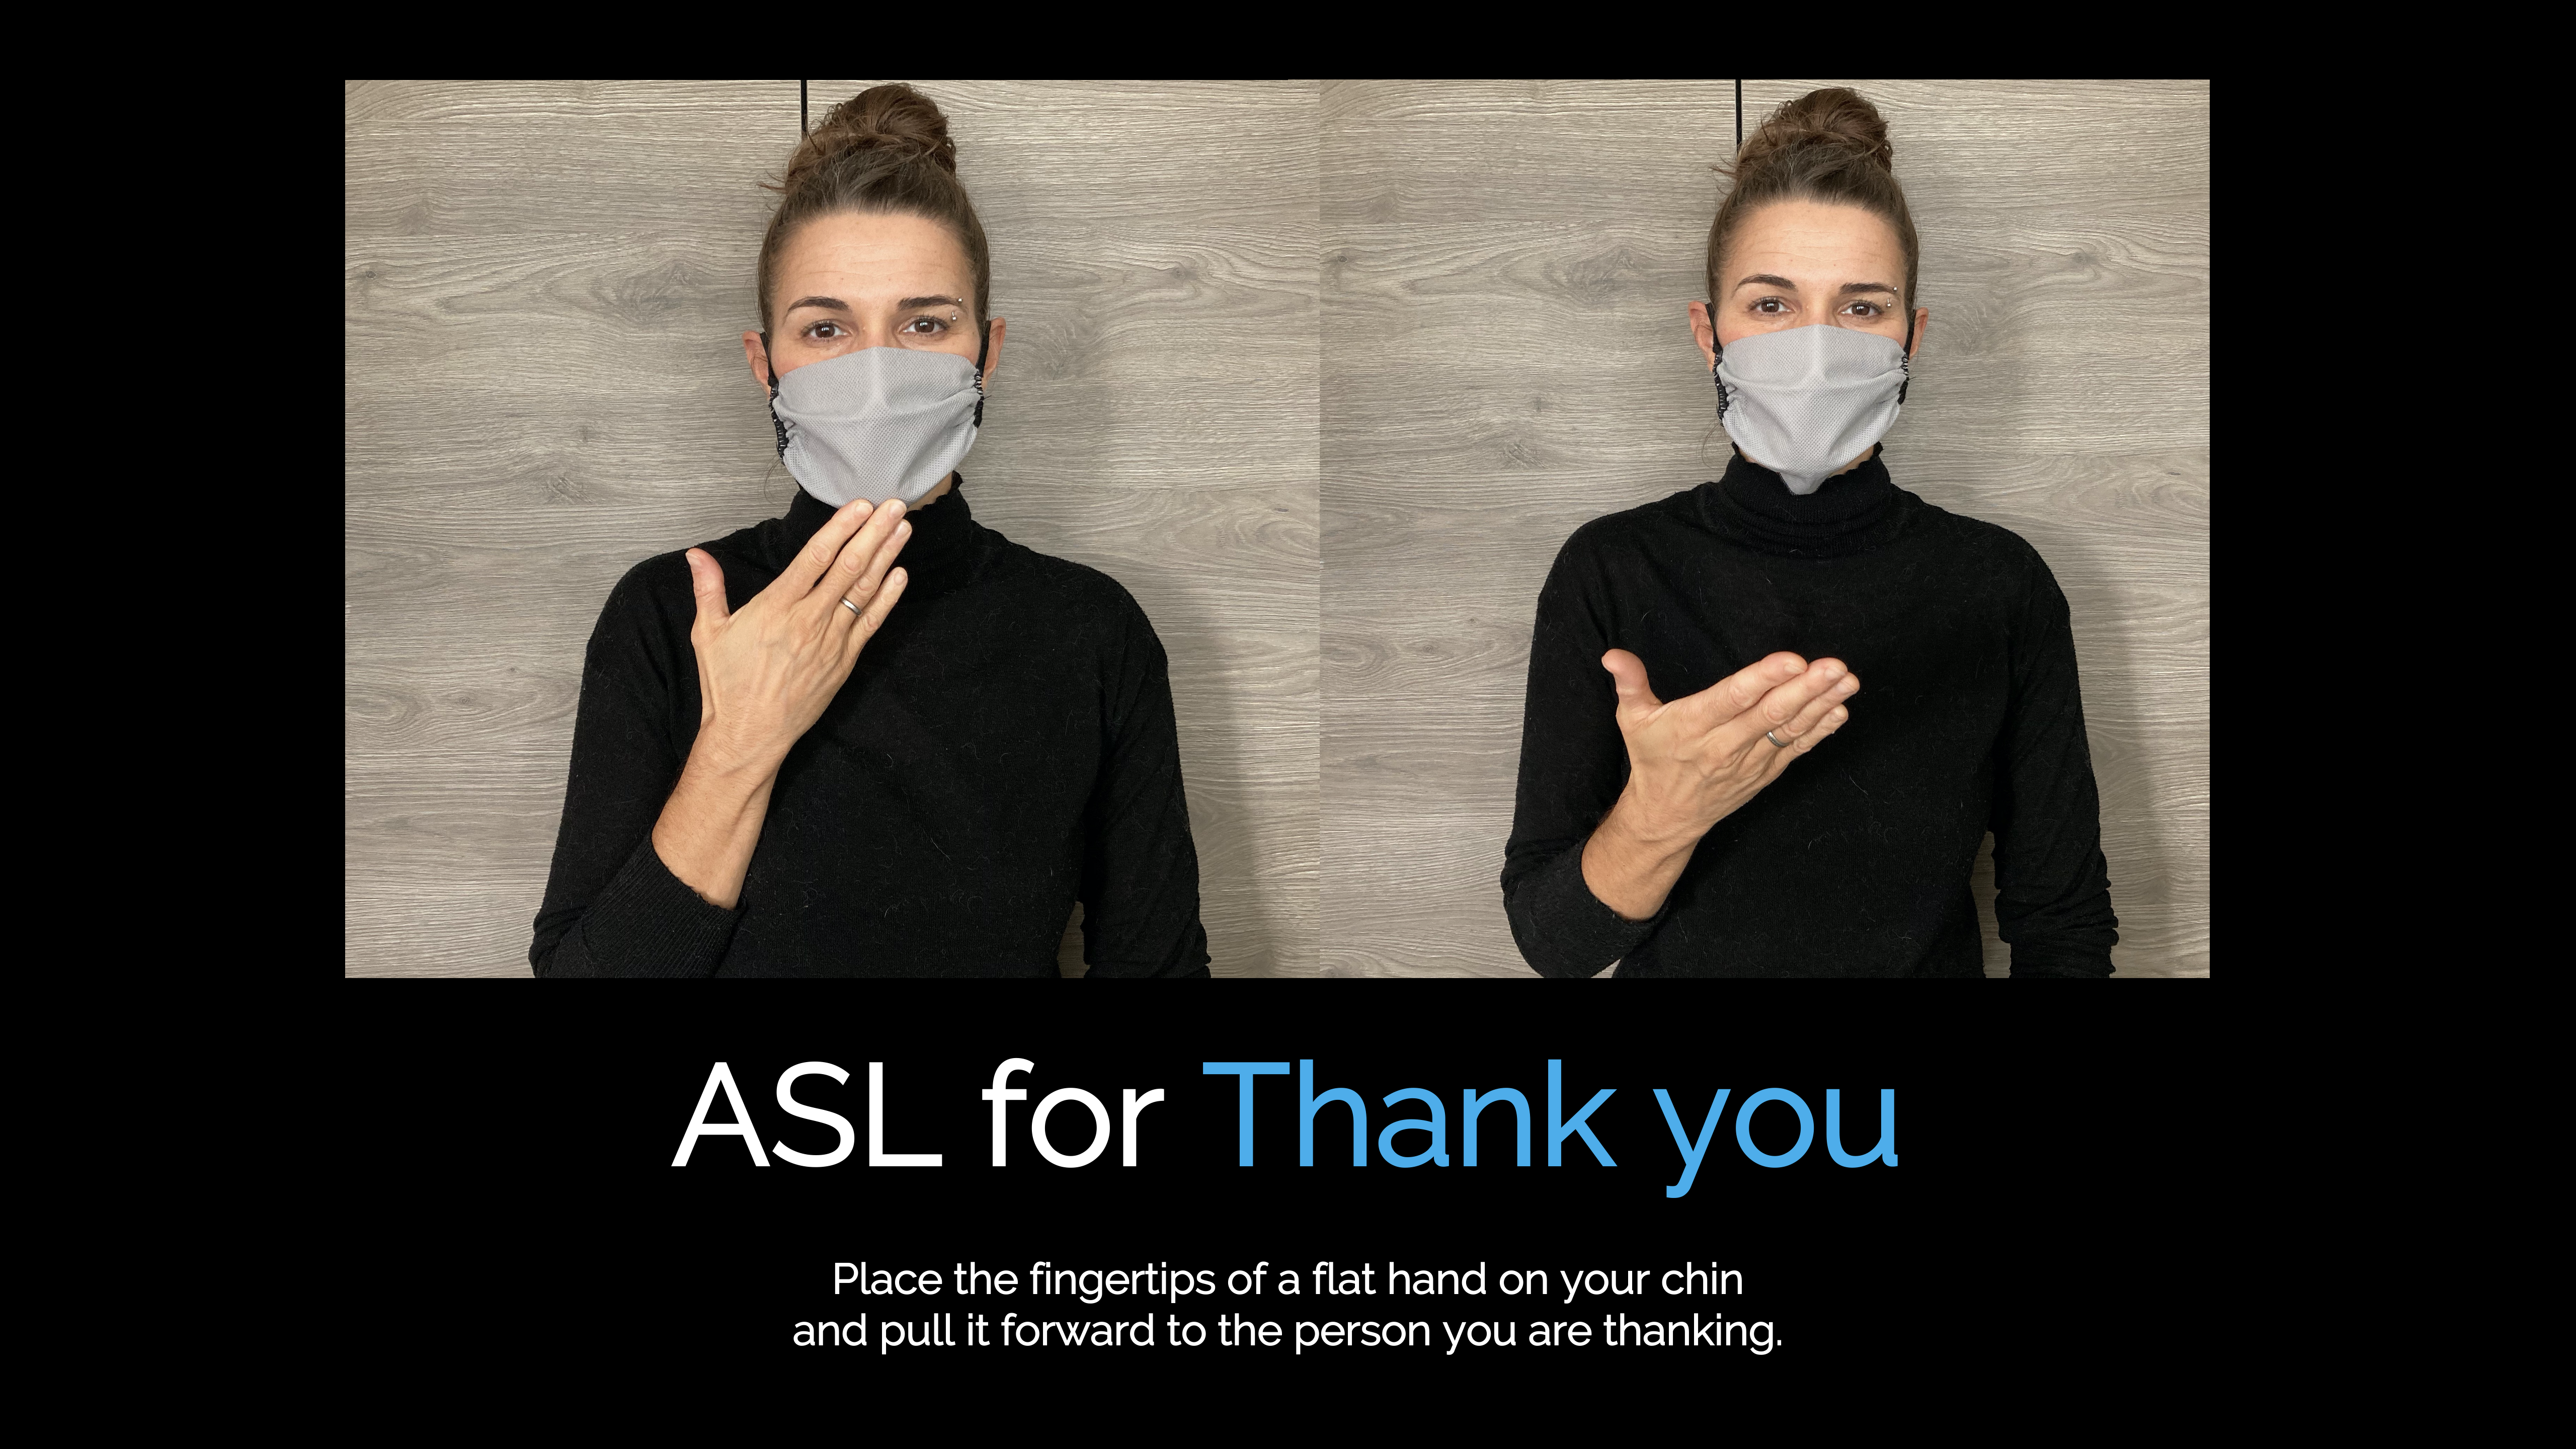 Woman does ASL for thank you